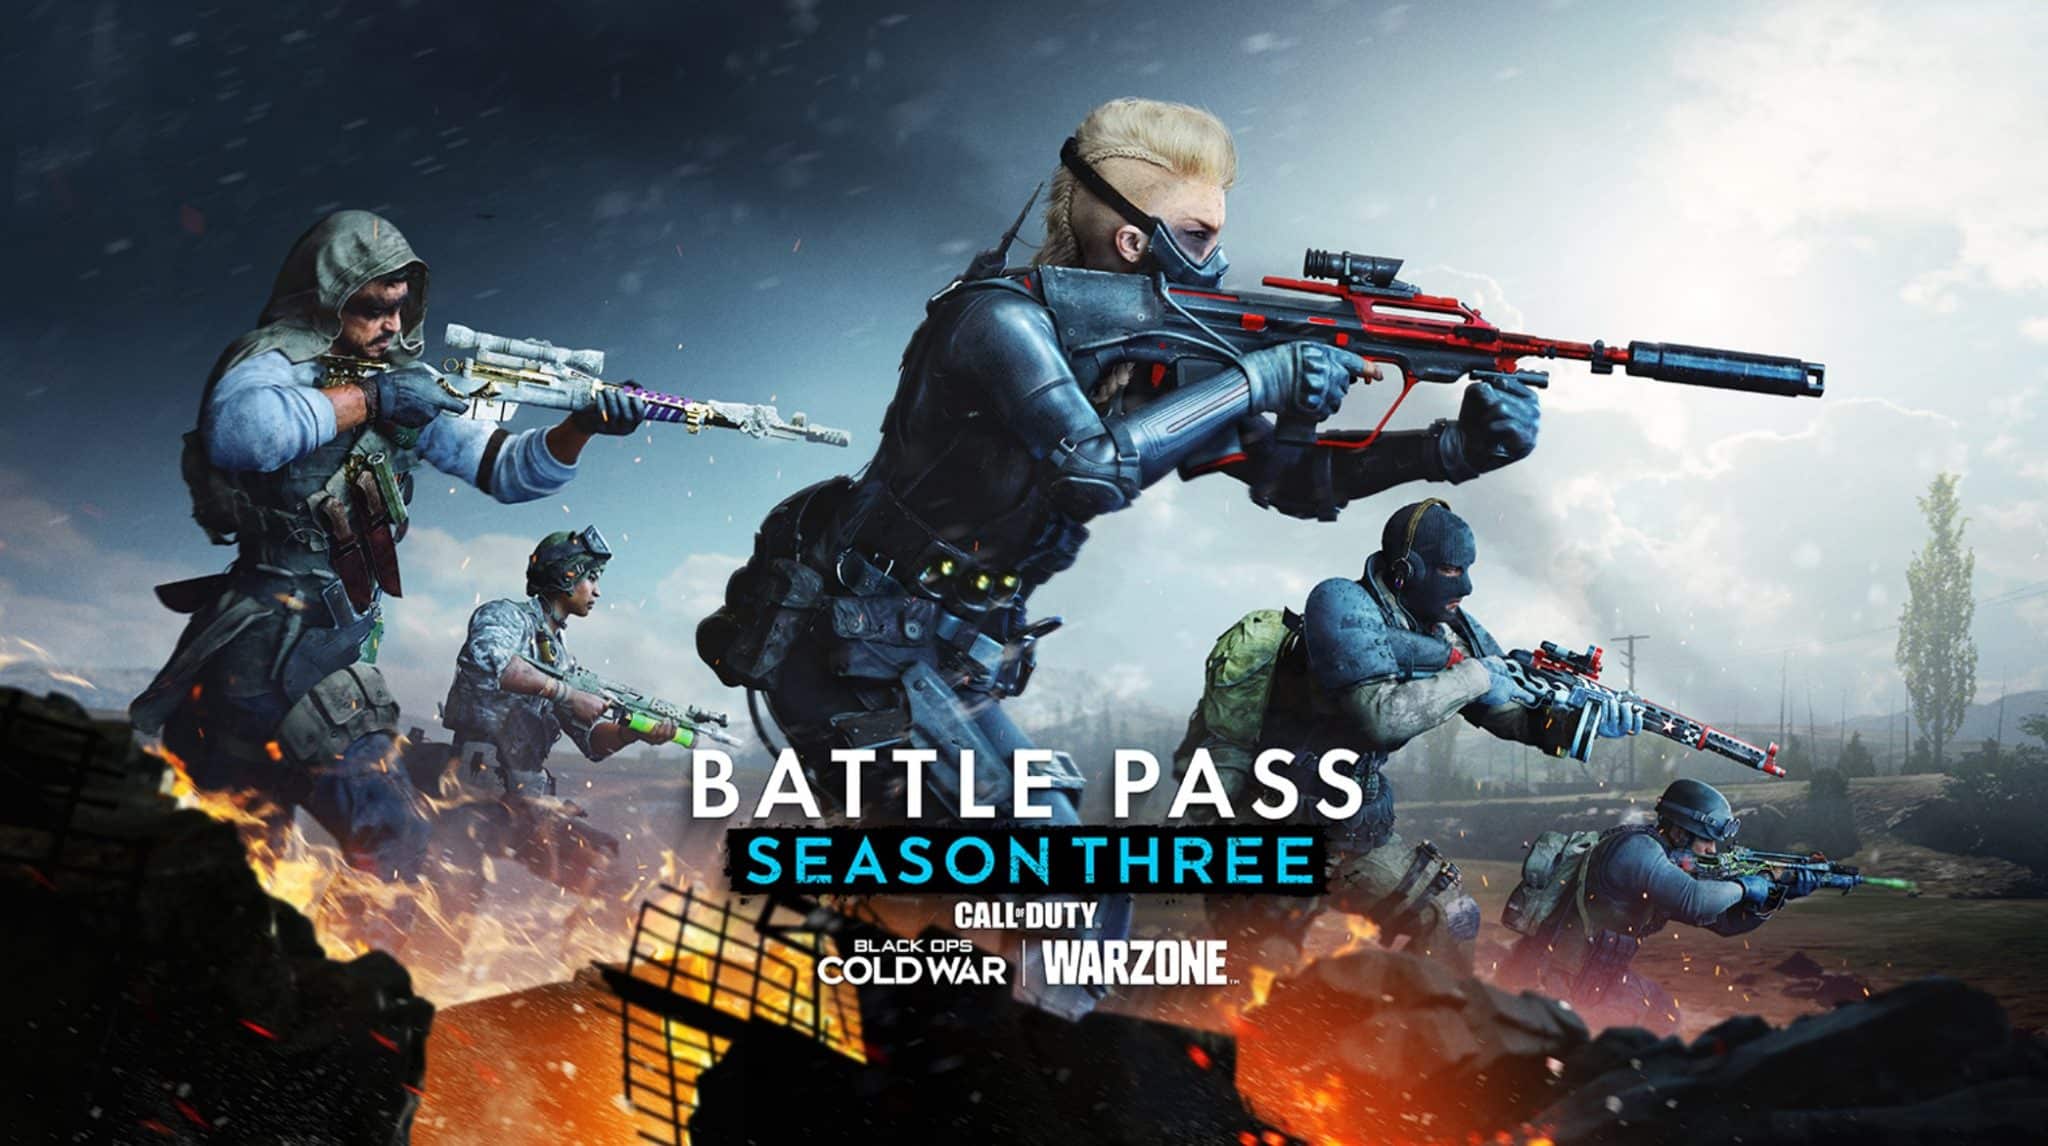 Warzone and Black Ops Cold War Season 3 Battle Pass